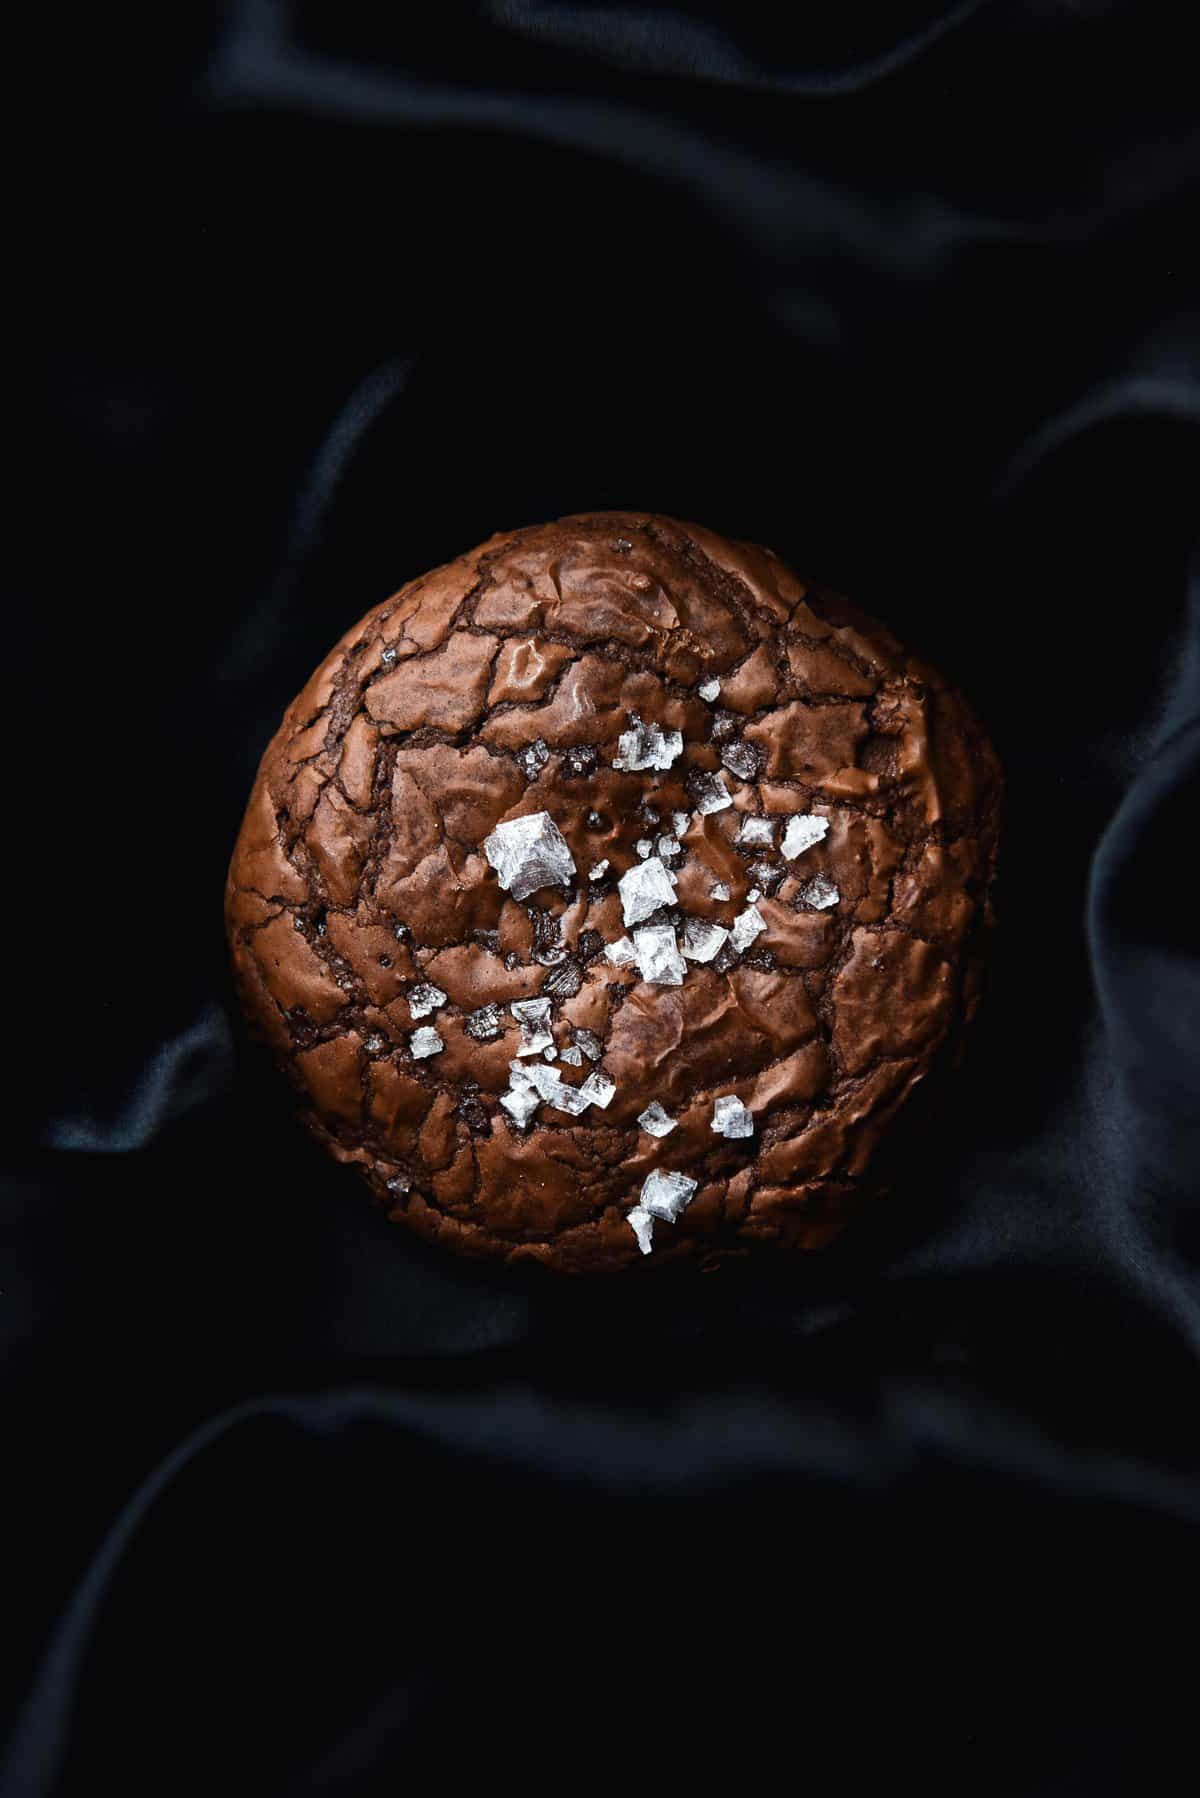 A dark aerial image of a crackled gluten free brownie cookie topped with sea salt flakes. The cookie sits atop a black silky backdrop.